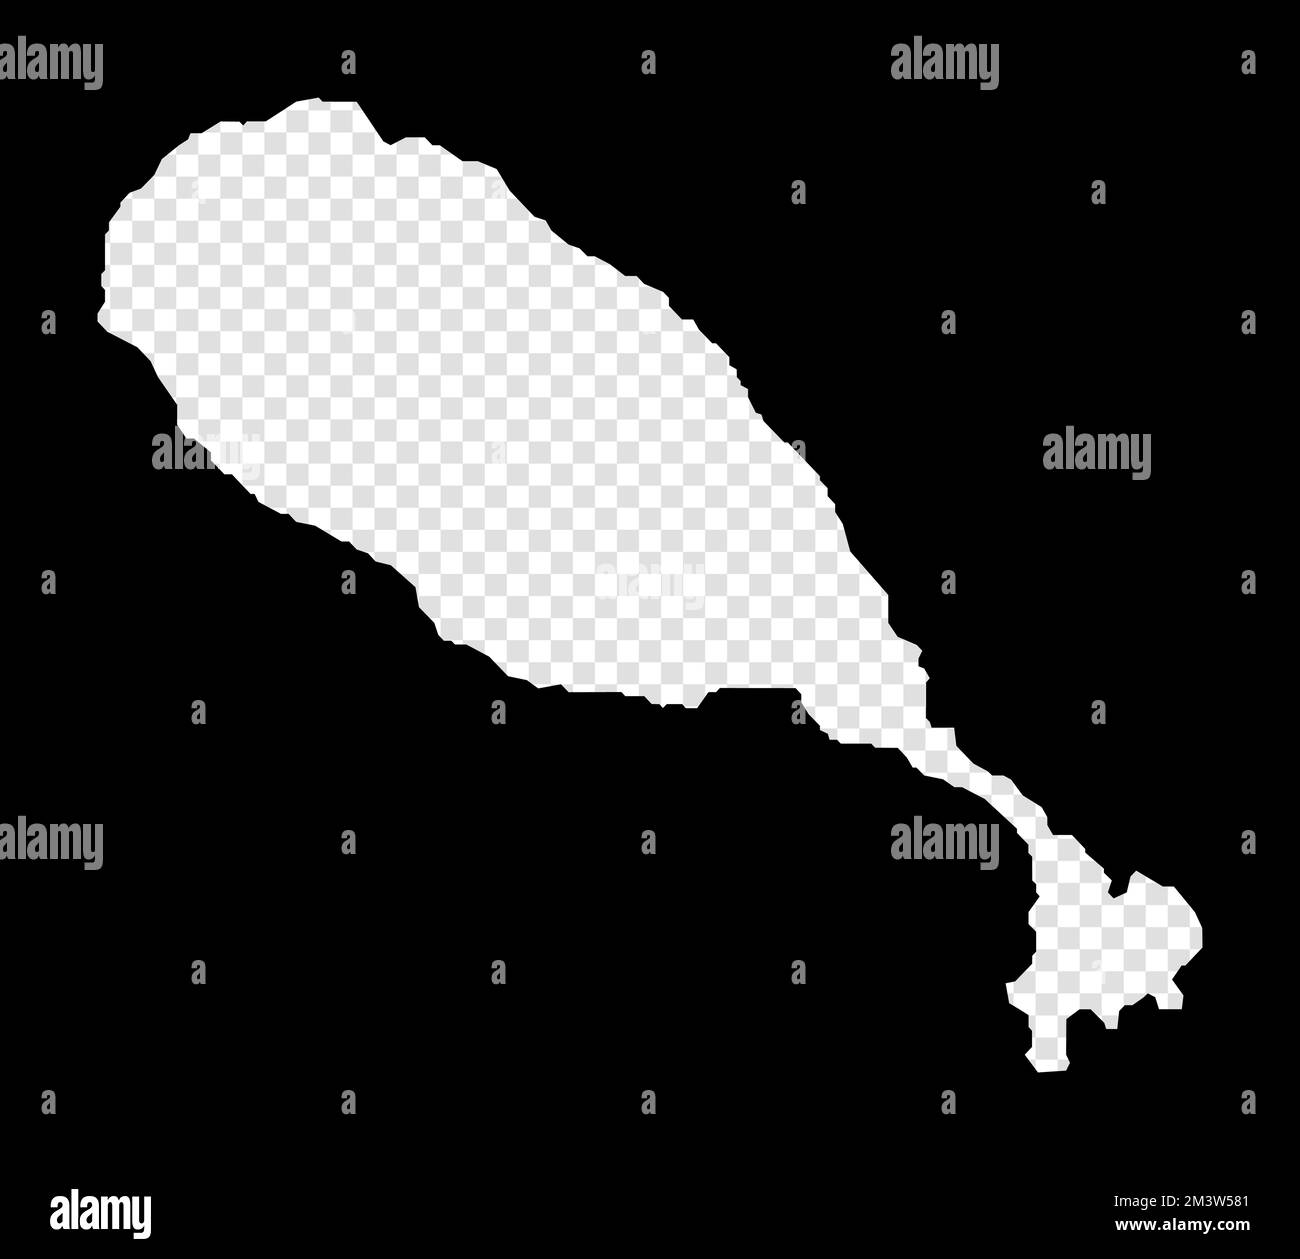 Stencil map of Saint Kitts. Simple and minimal transparent map of Saint Kitts. Black rectangle with cut shape of the island. Beautiful vector illustra Stock Vector